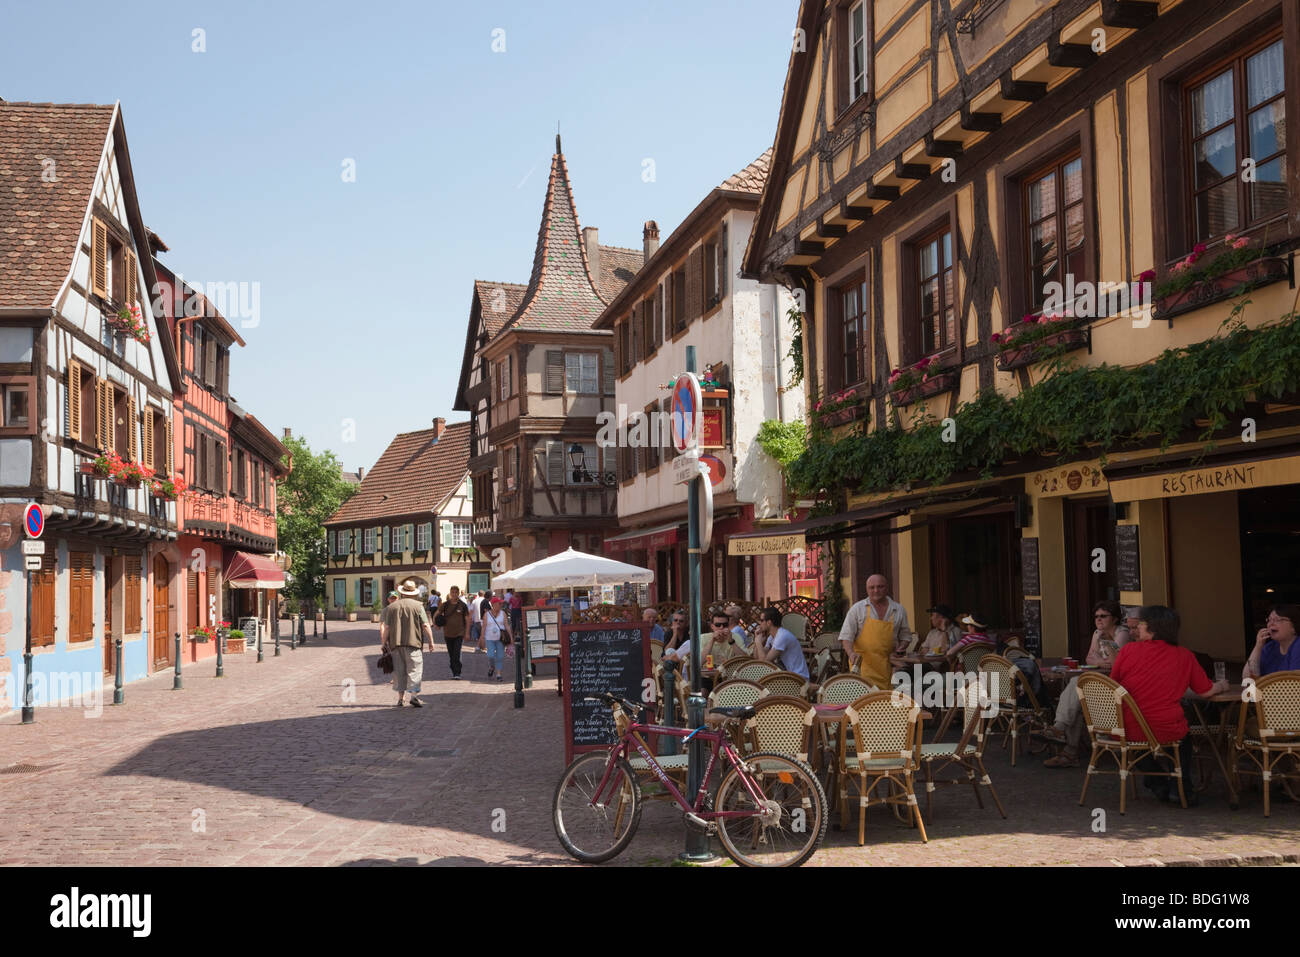 Street scene with pavement cafe in medieval town on the Alsatian wine route. Kaysersberg, Alsace, Haut-Rhin, France, Europe. Stock Photo